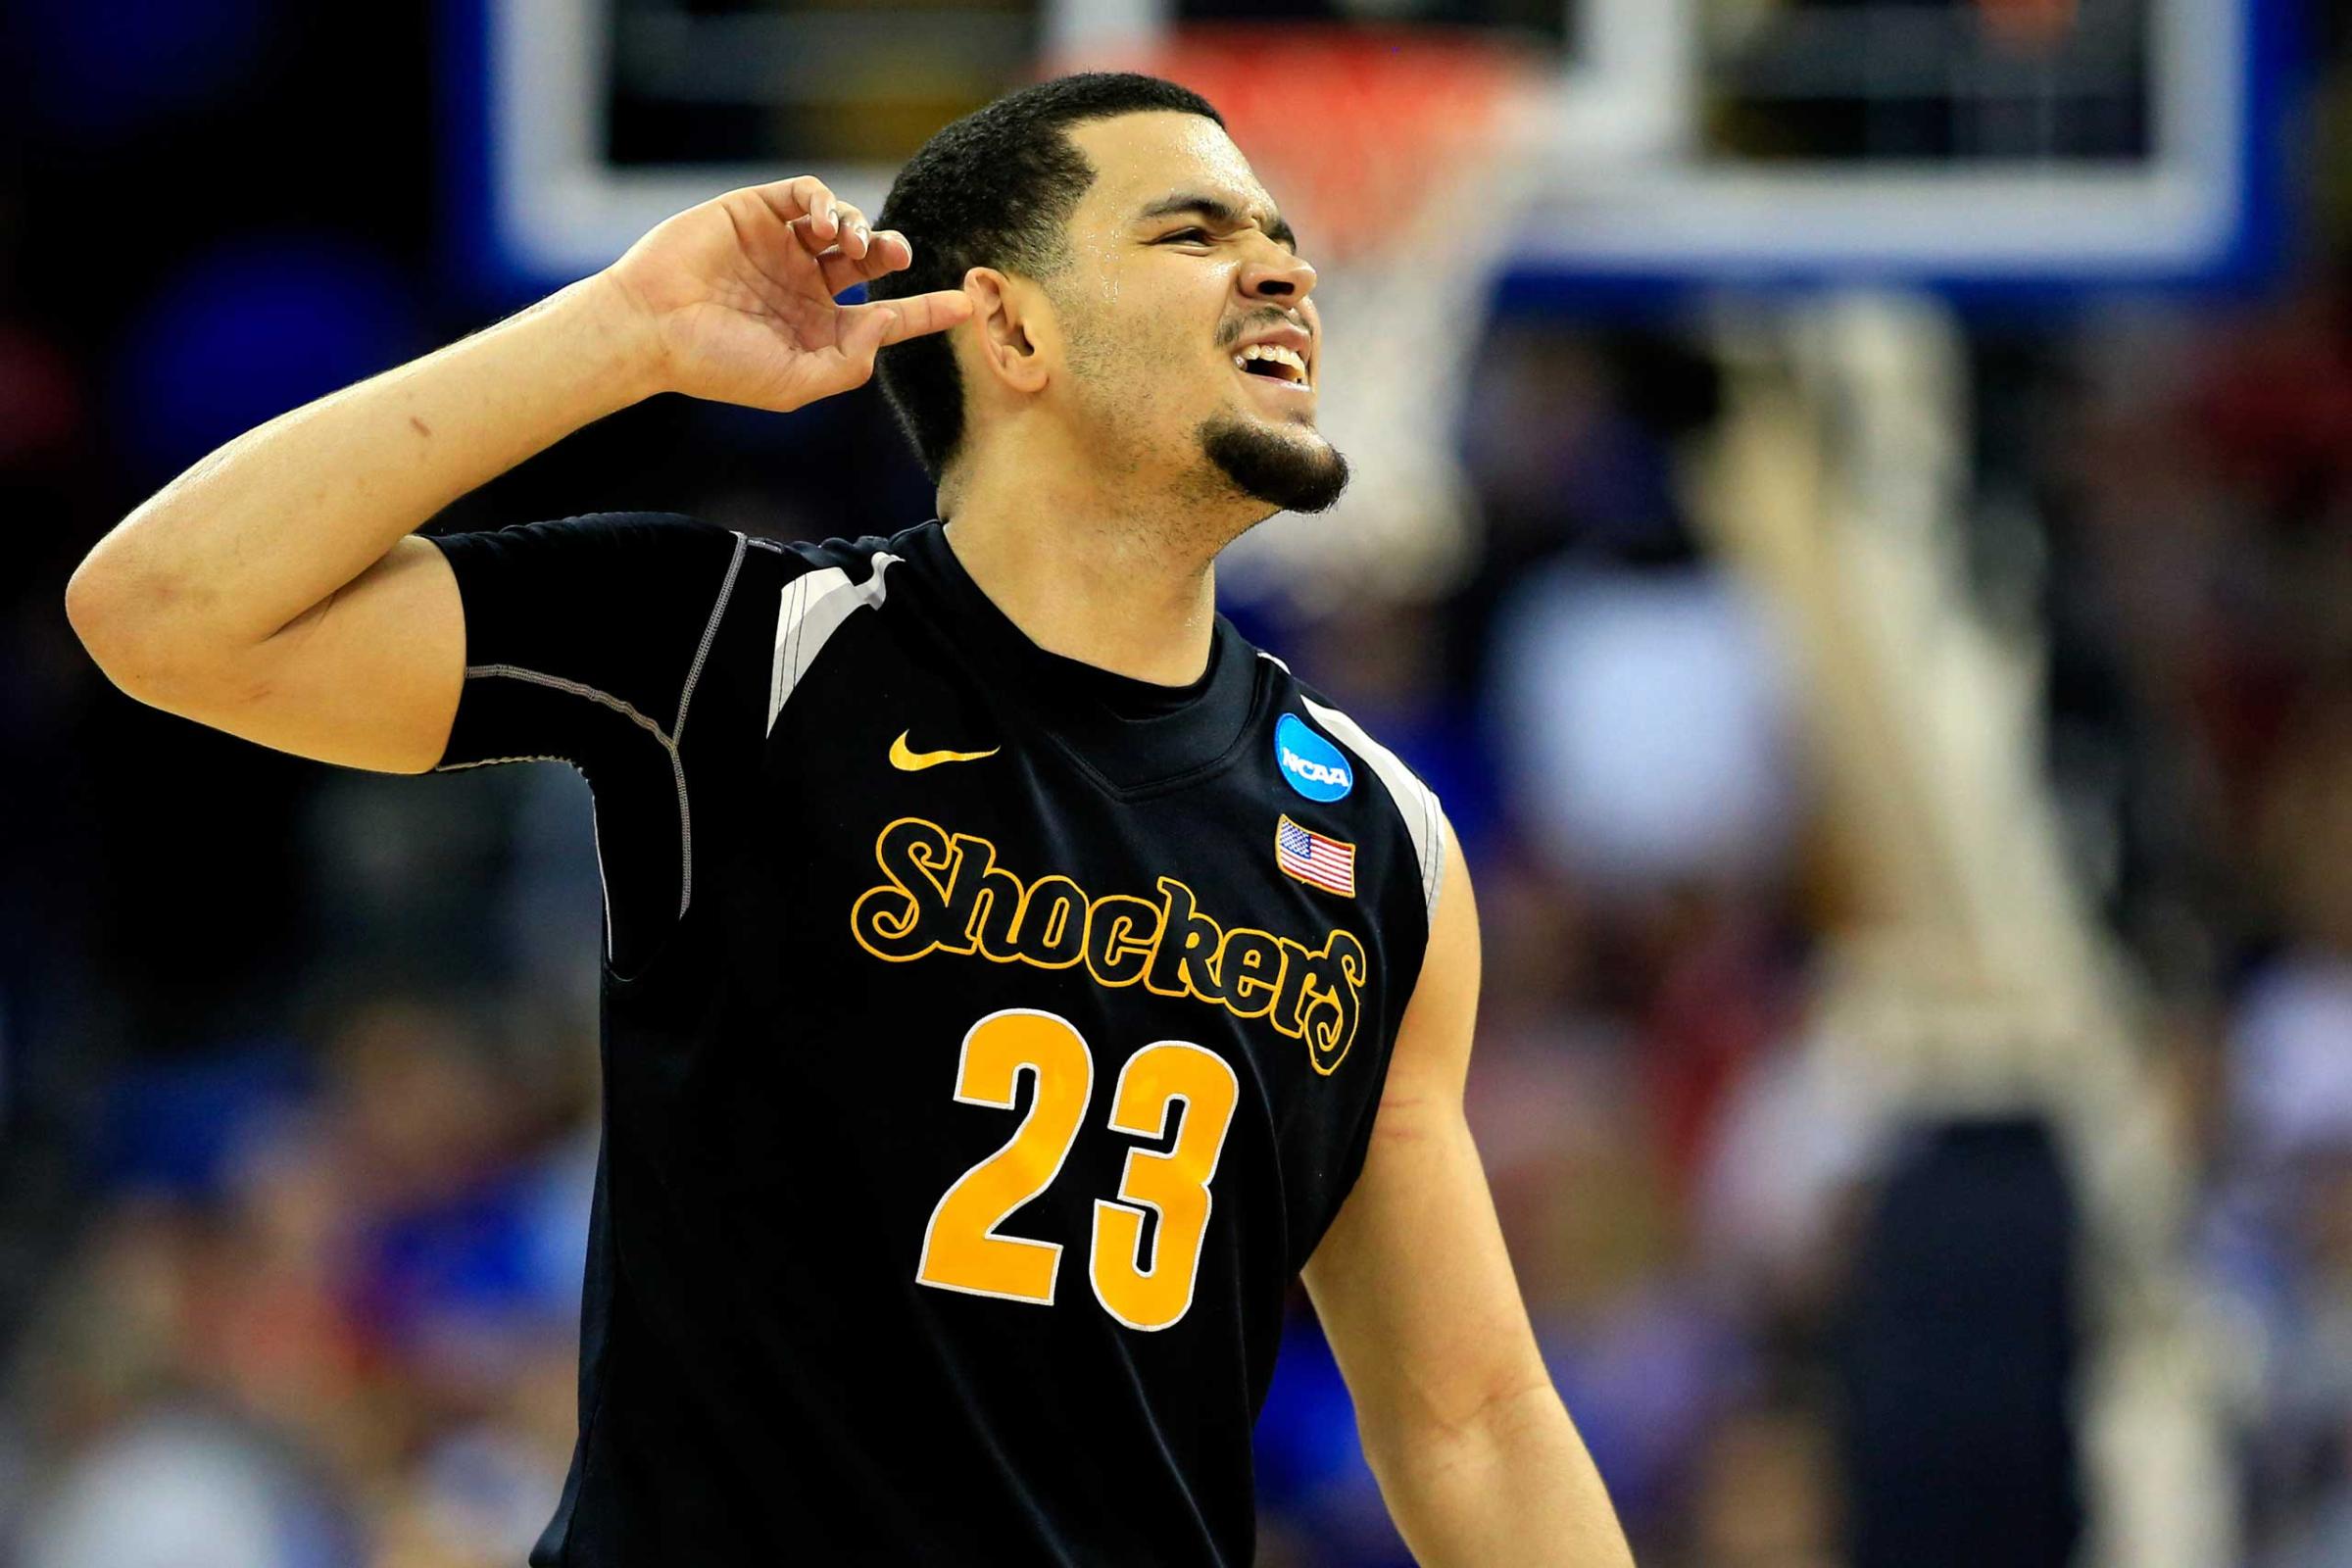 Fred VanVleet of the Wichita State Shockers celebrates as the second half ends against the Kansas Jayhawks during the third round of the 2015 NCAA Men's Basketball Tournament at the CenturyLink Center in Omaha, Neb. on March 22, 2015.